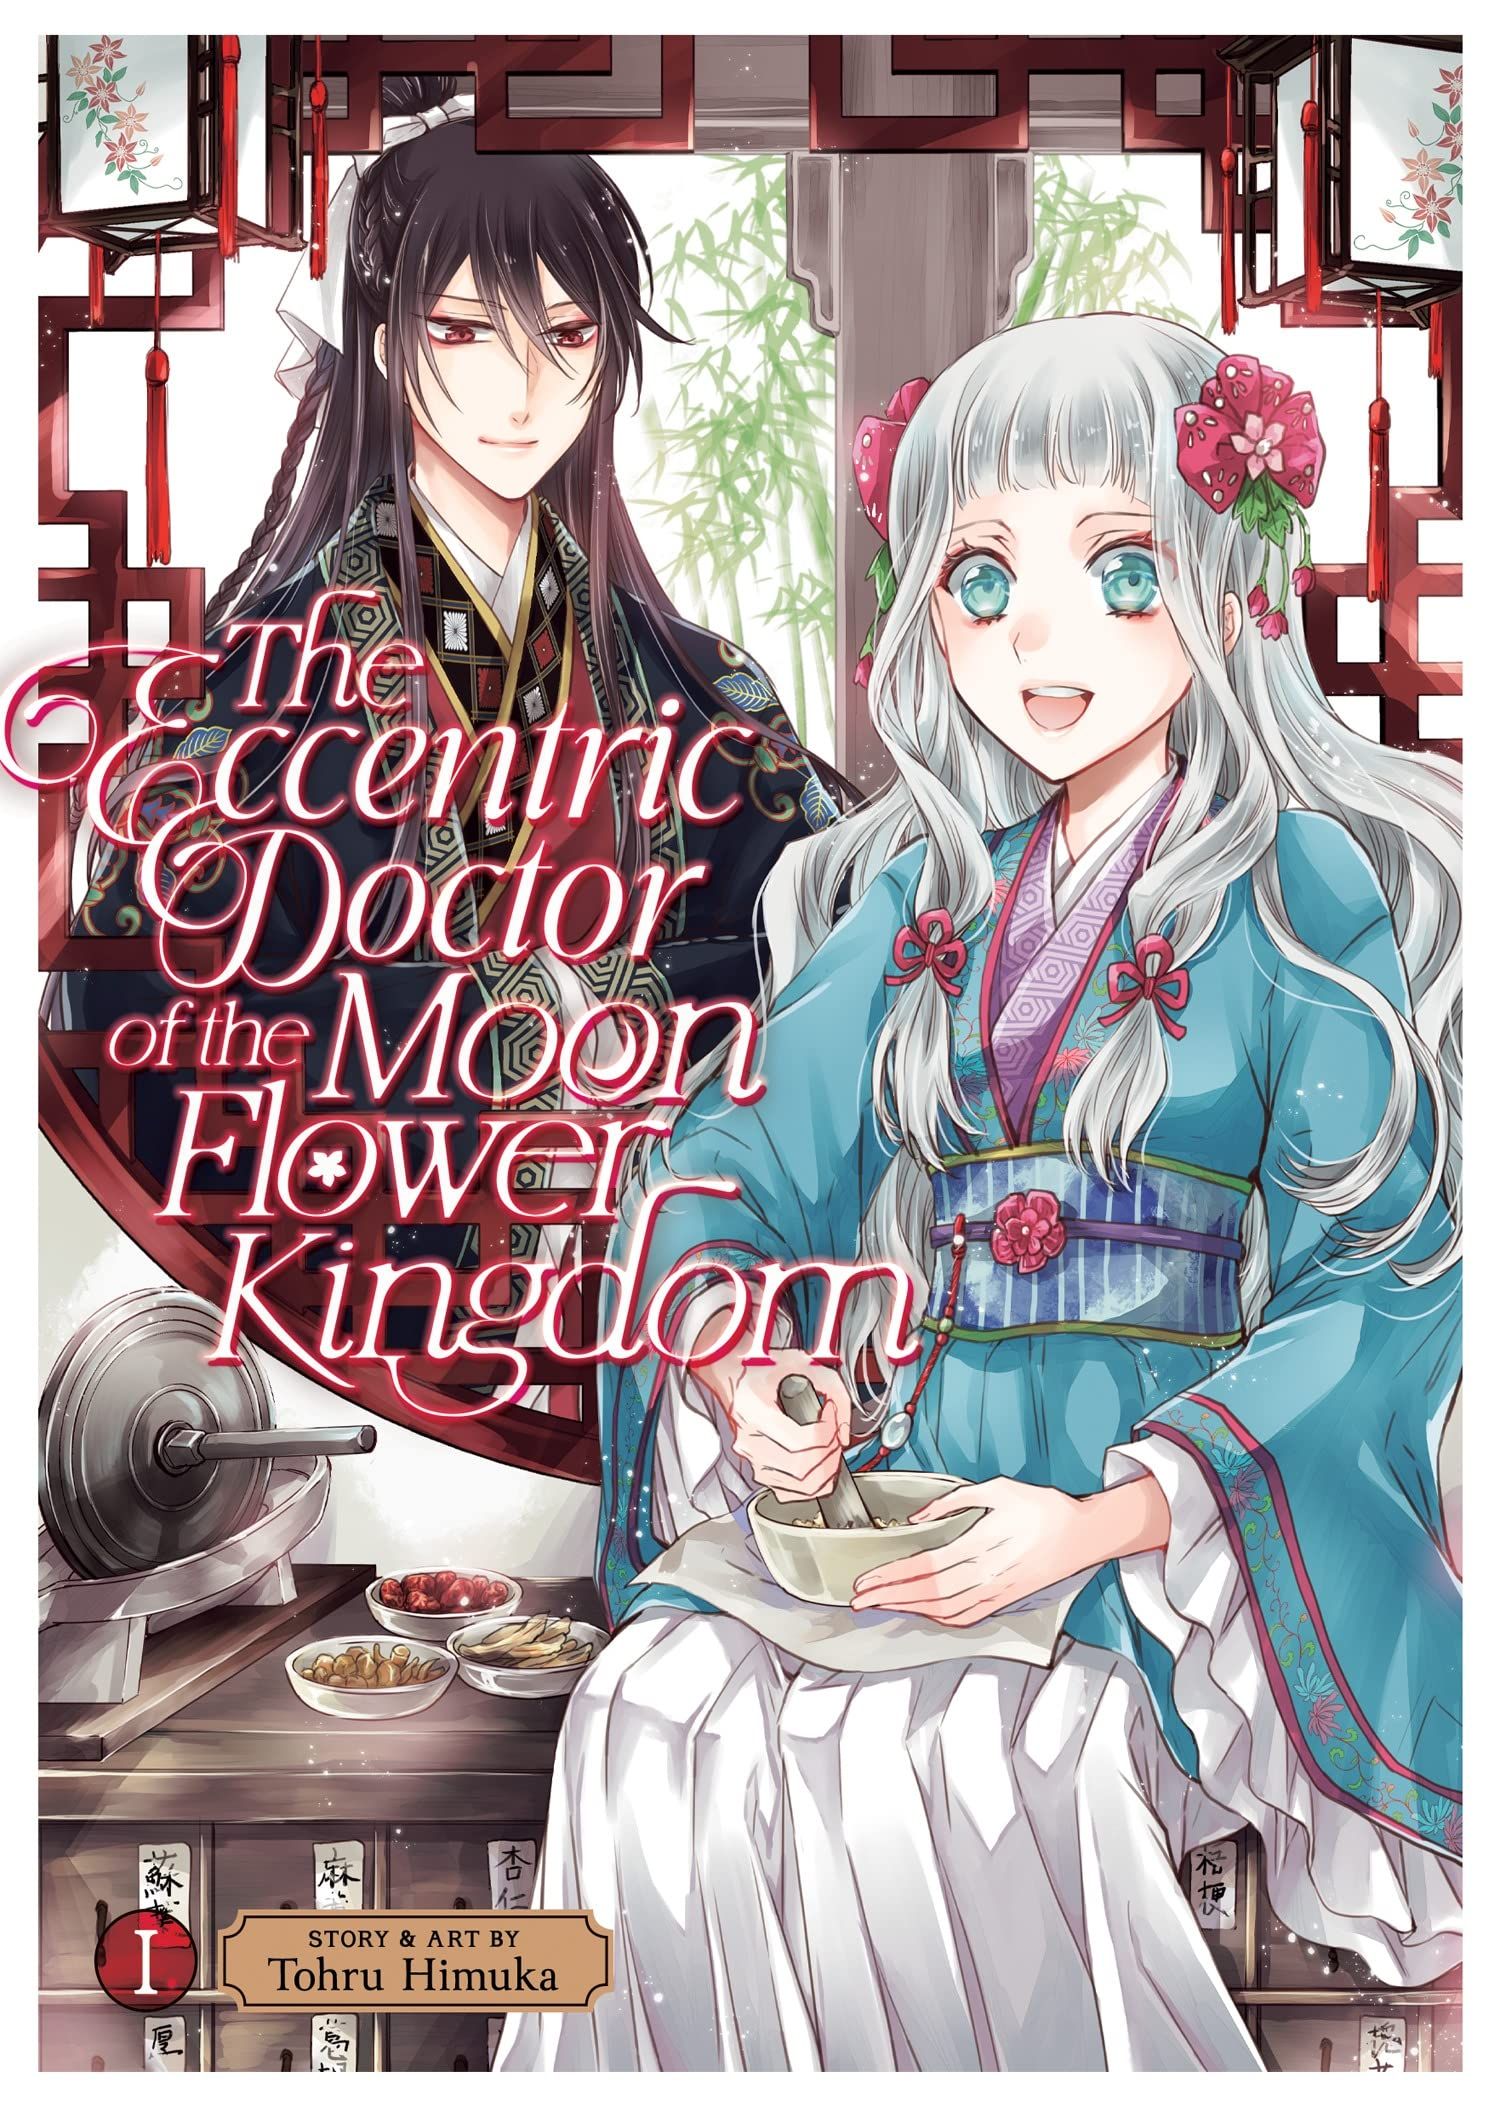 The Eccentric Doctor of the Moon Flower Kingdom by Tohru Himuka cover